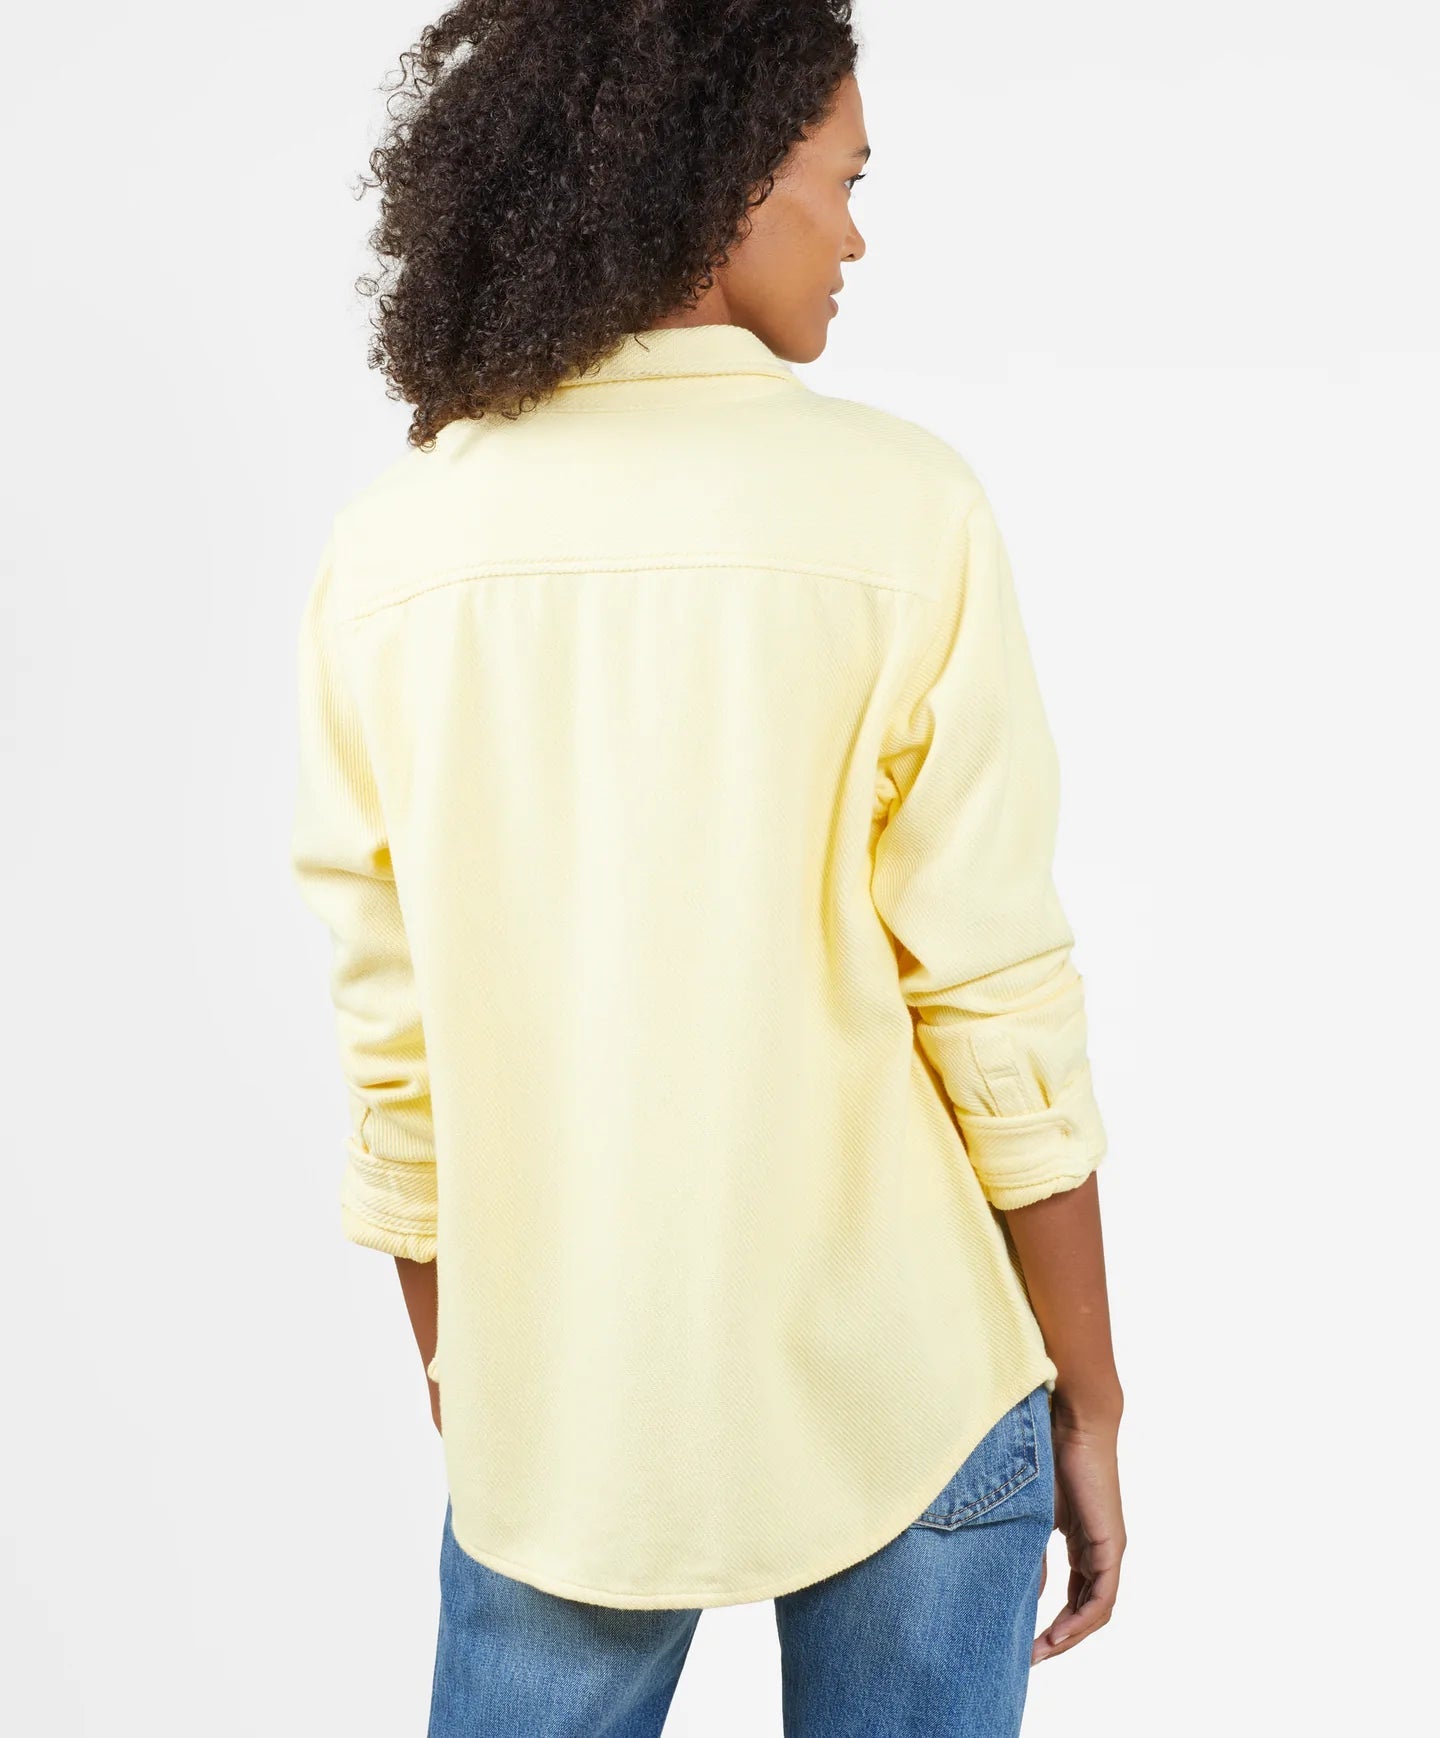 Outerknown Women's Chroma Blanket Shirt Apparel & Accessories > Clothing OUTERKNOWN WOMENS 